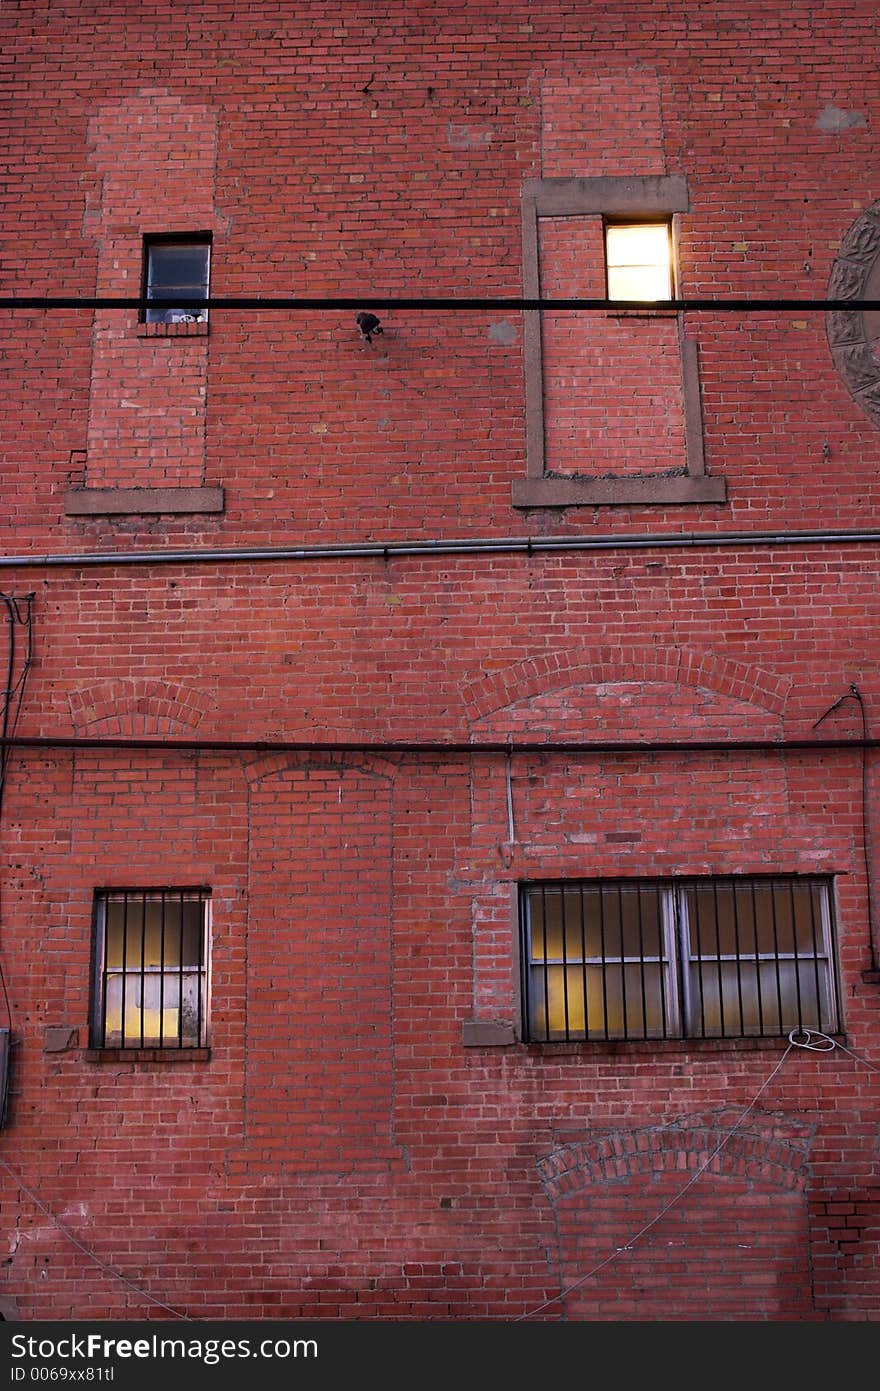 Four different windows on a grungy red brick wall in an alley. One upper window has a light brightly shining which contrasts with the dim glow from the other windows. Lower two windows have security bars. Four different windows on a grungy red brick wall in an alley. One upper window has a light brightly shining which contrasts with the dim glow from the other windows. Lower two windows have security bars.